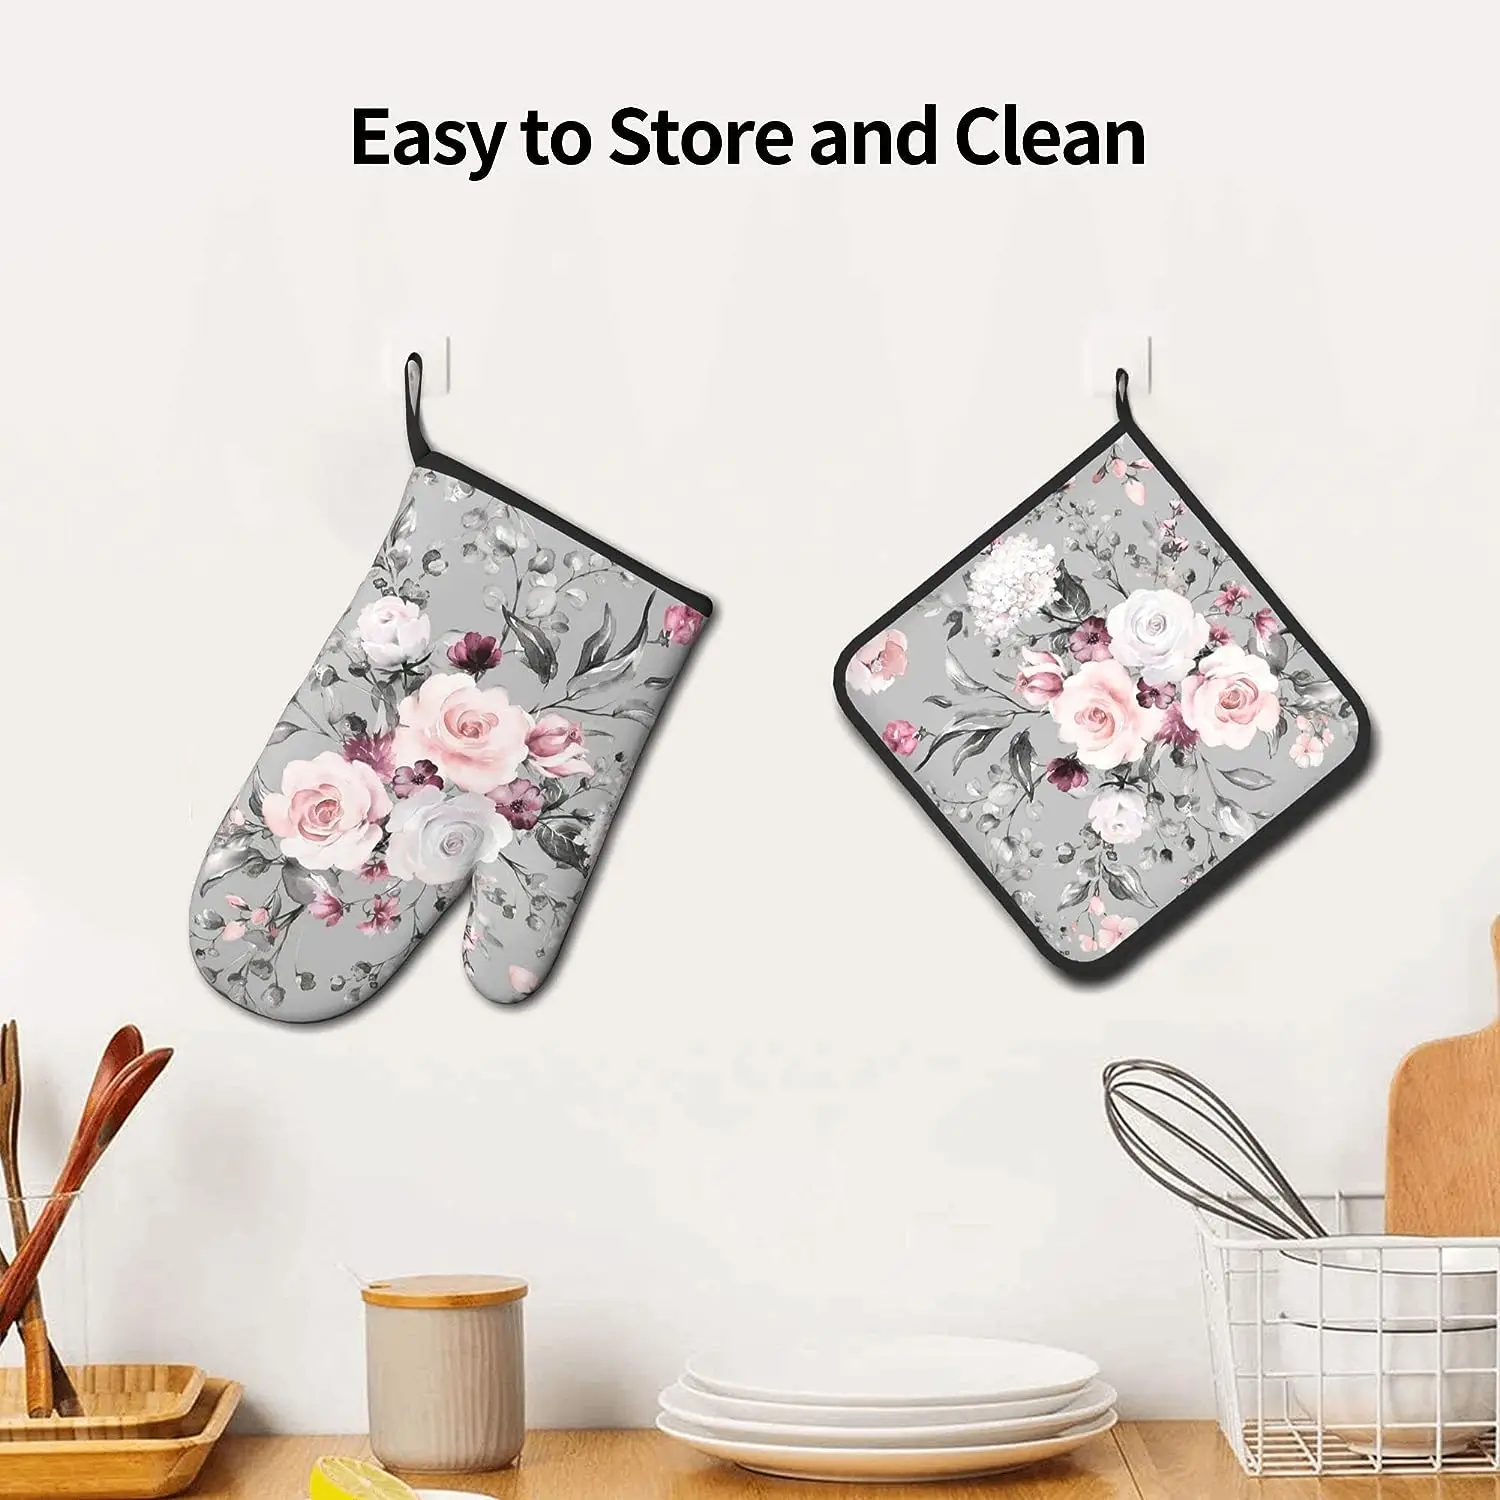 https://ae01.alicdn.com/kf/S7f9a38acc0c14b5f8c13097361b45a0ae/Gray-Flower-Oven-Mitts-and-Pot-Holders-Sets-Pink-Roses-Oven-Gloves-Hot-Pads-Kitchen-Heat.jpg